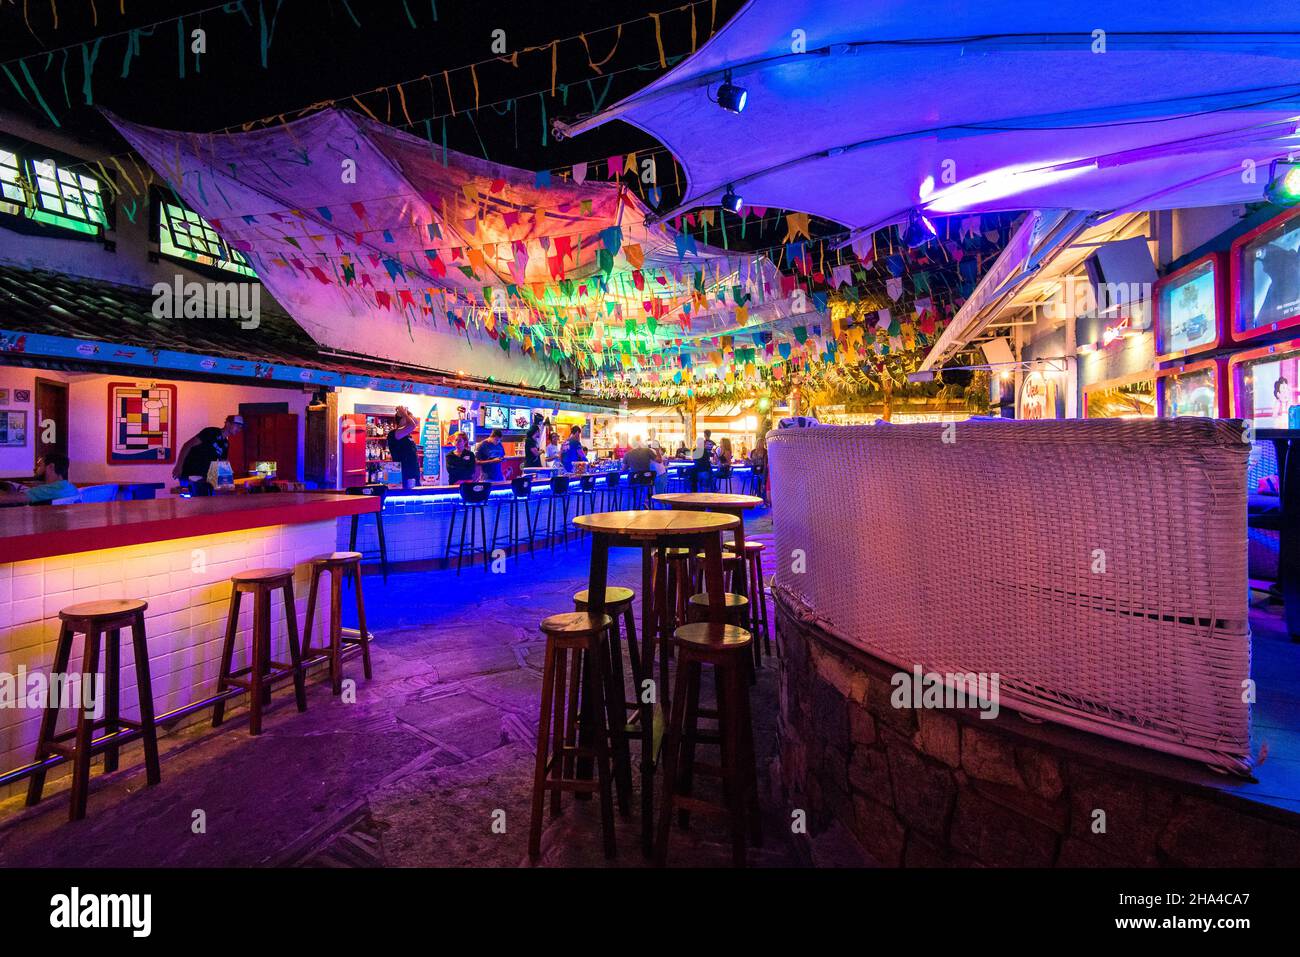 Buzios, Brazil - July 24, 2018: Interior of bar and restaurant with colorful lights at night. Stock Photo